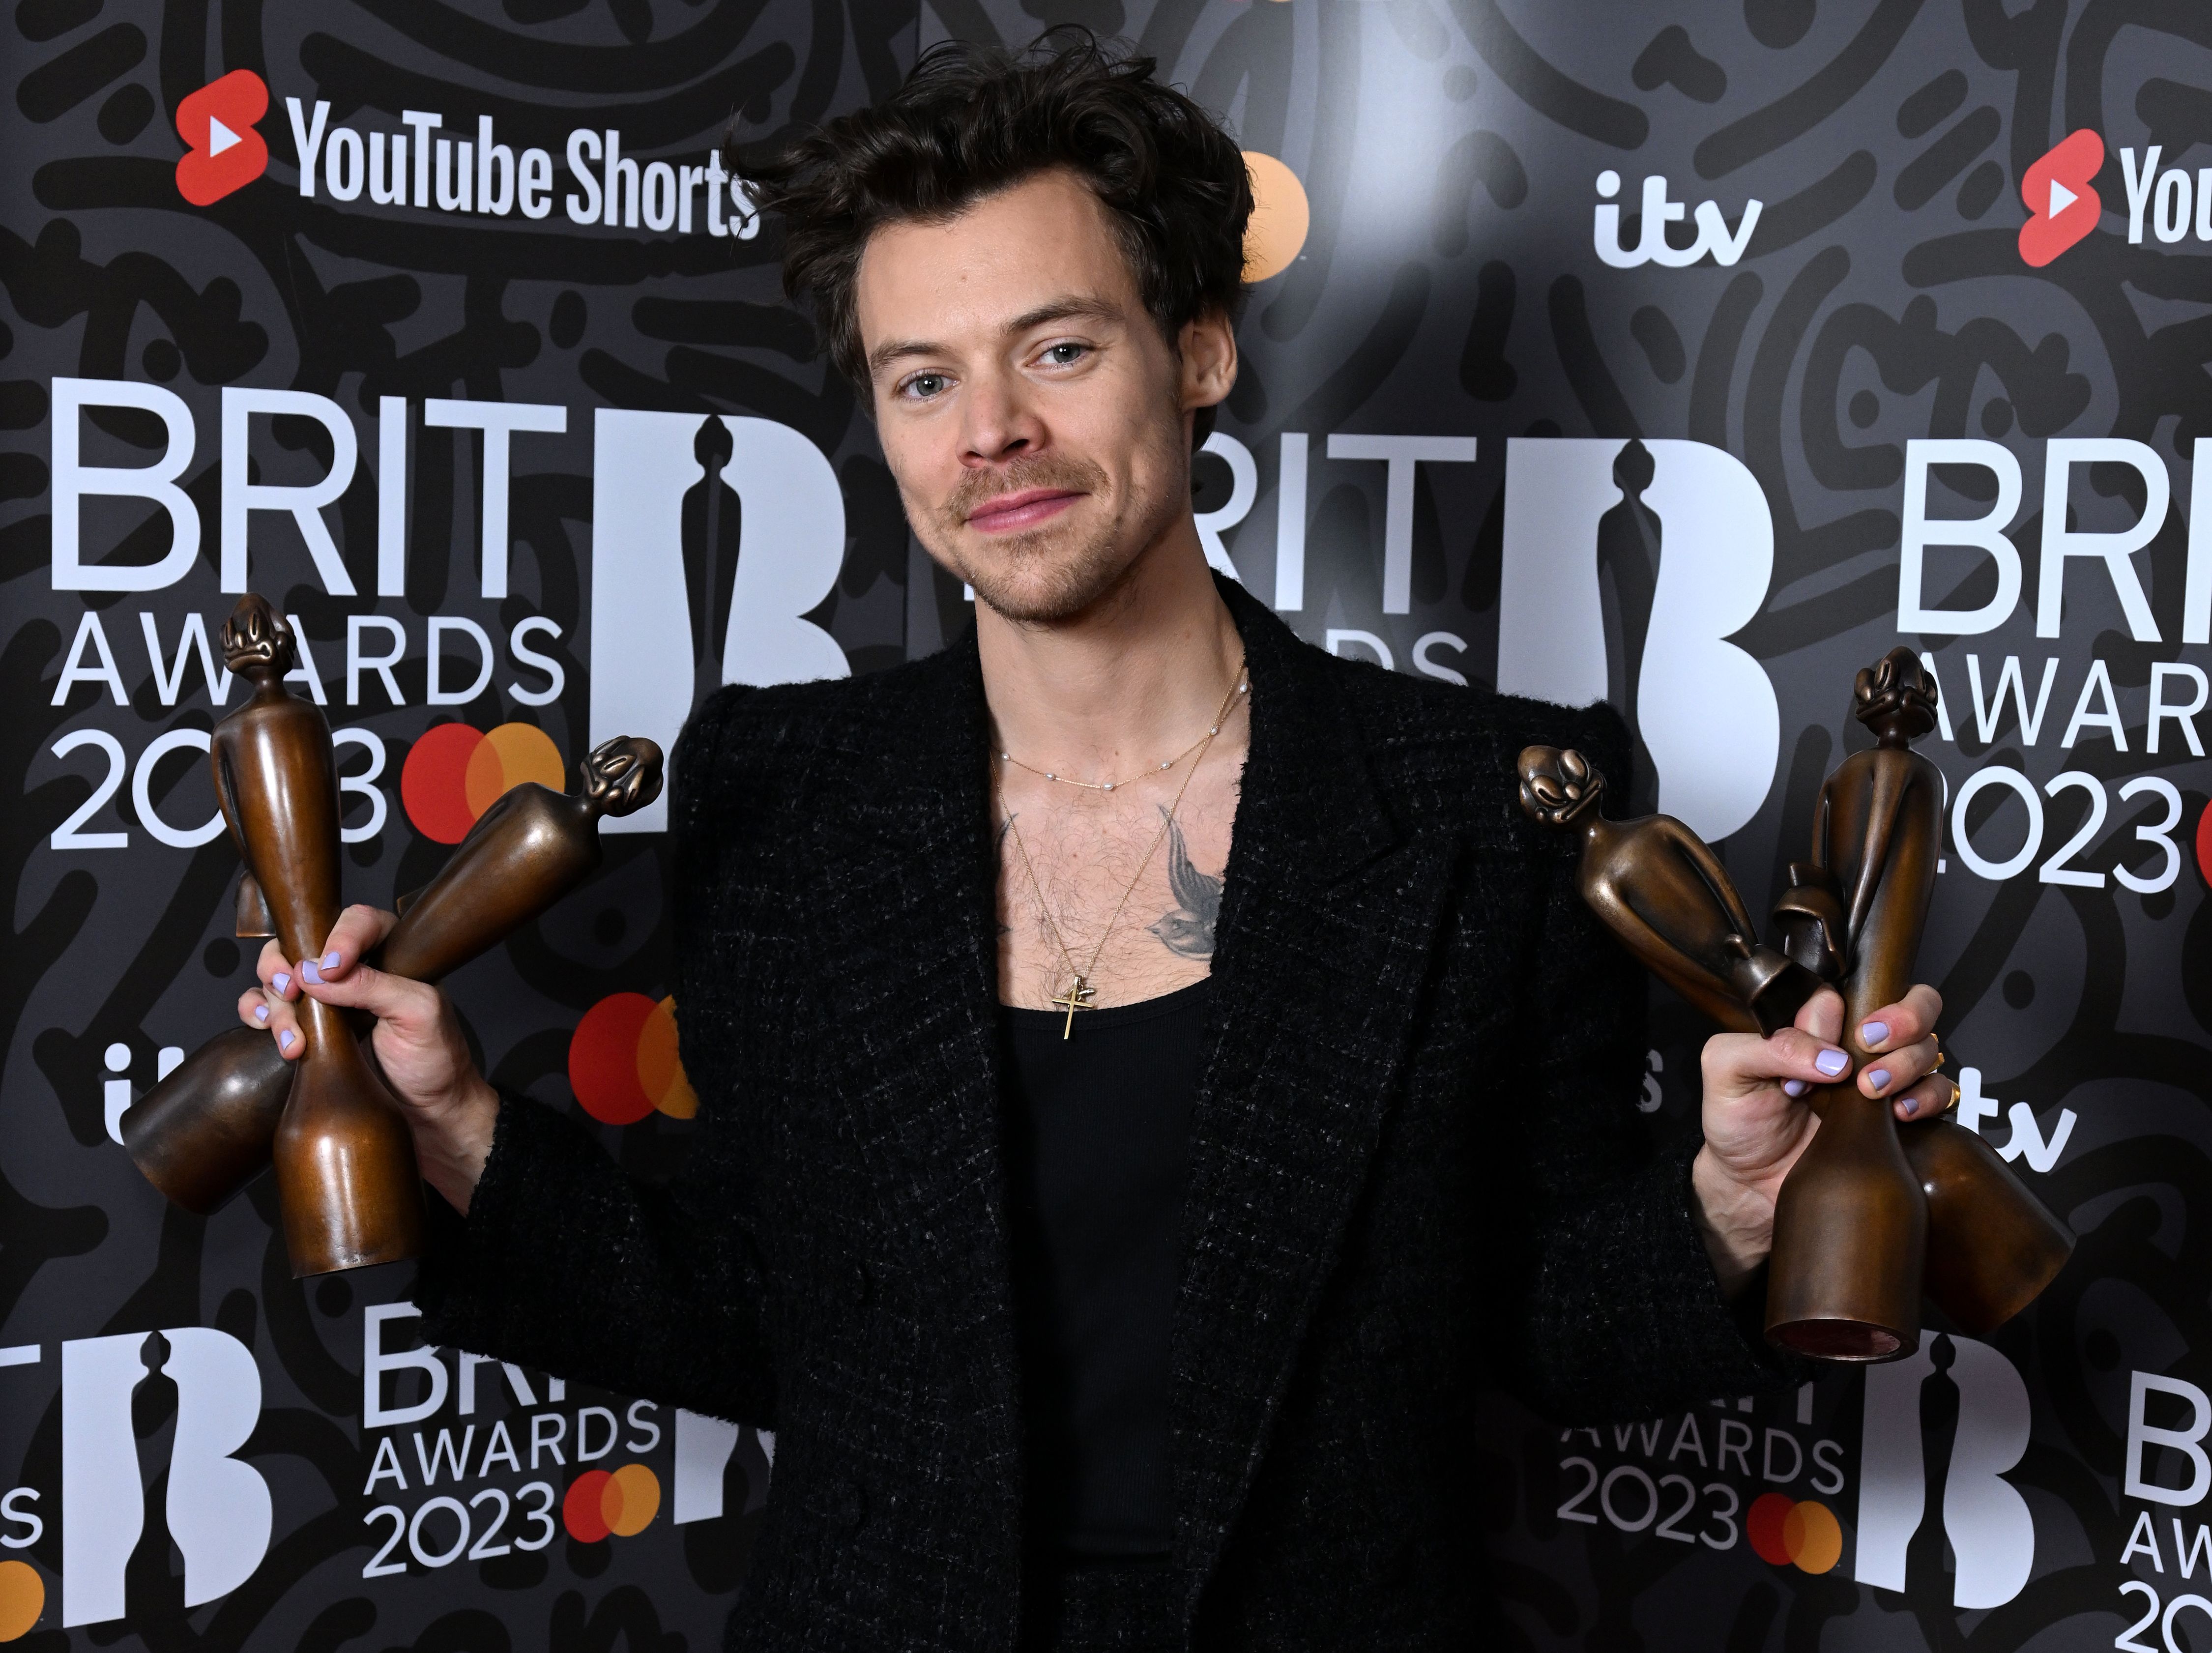 Harry Styles' Awards List Nominations,